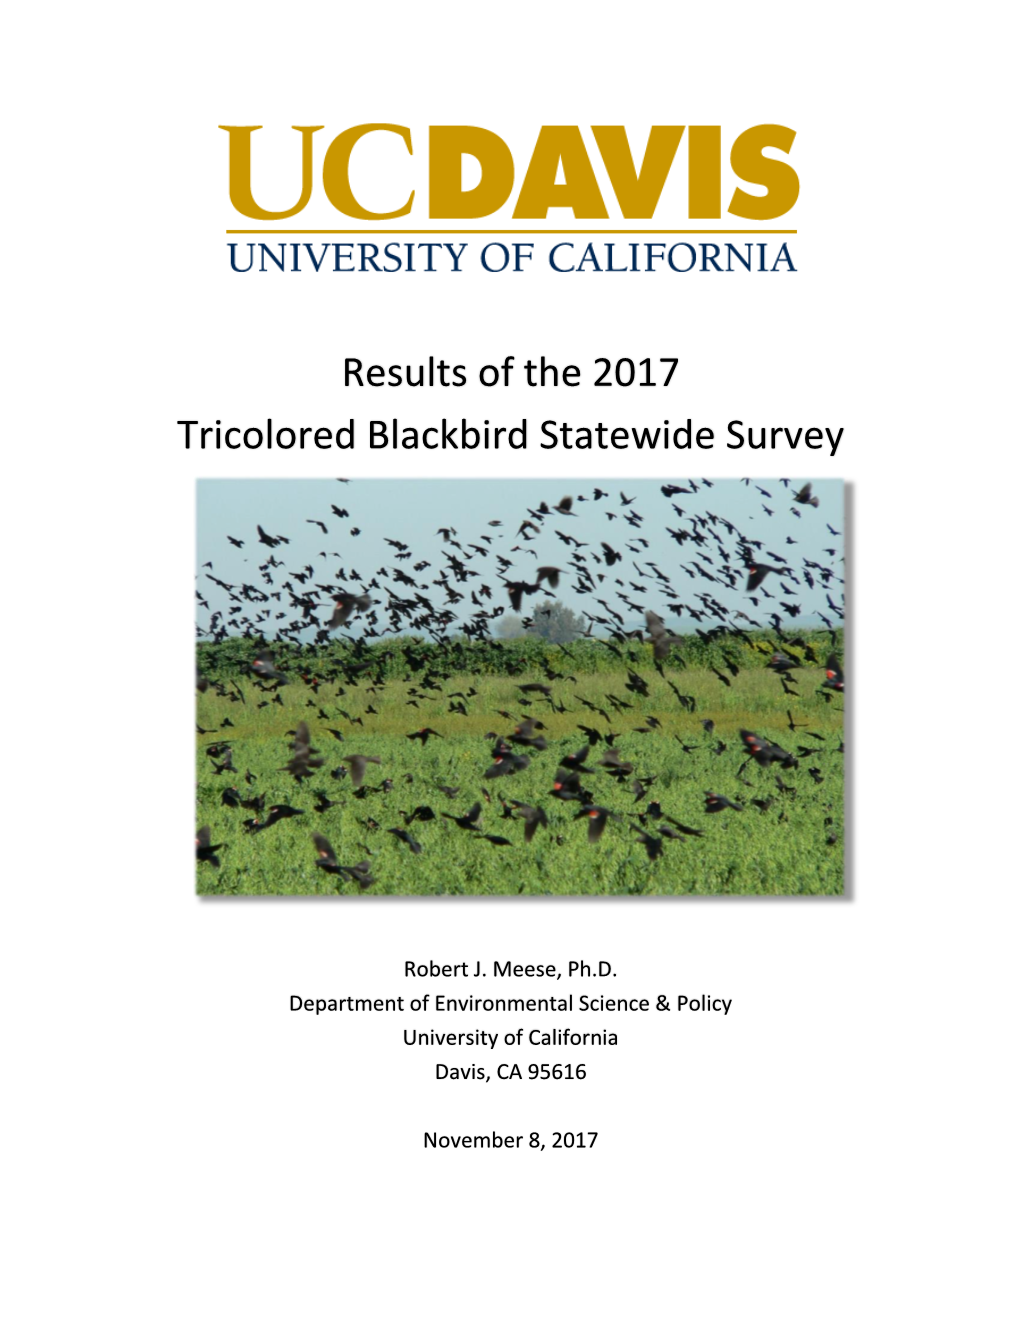 Results of the 2017 Tricolored Blackbird Statewide Survey